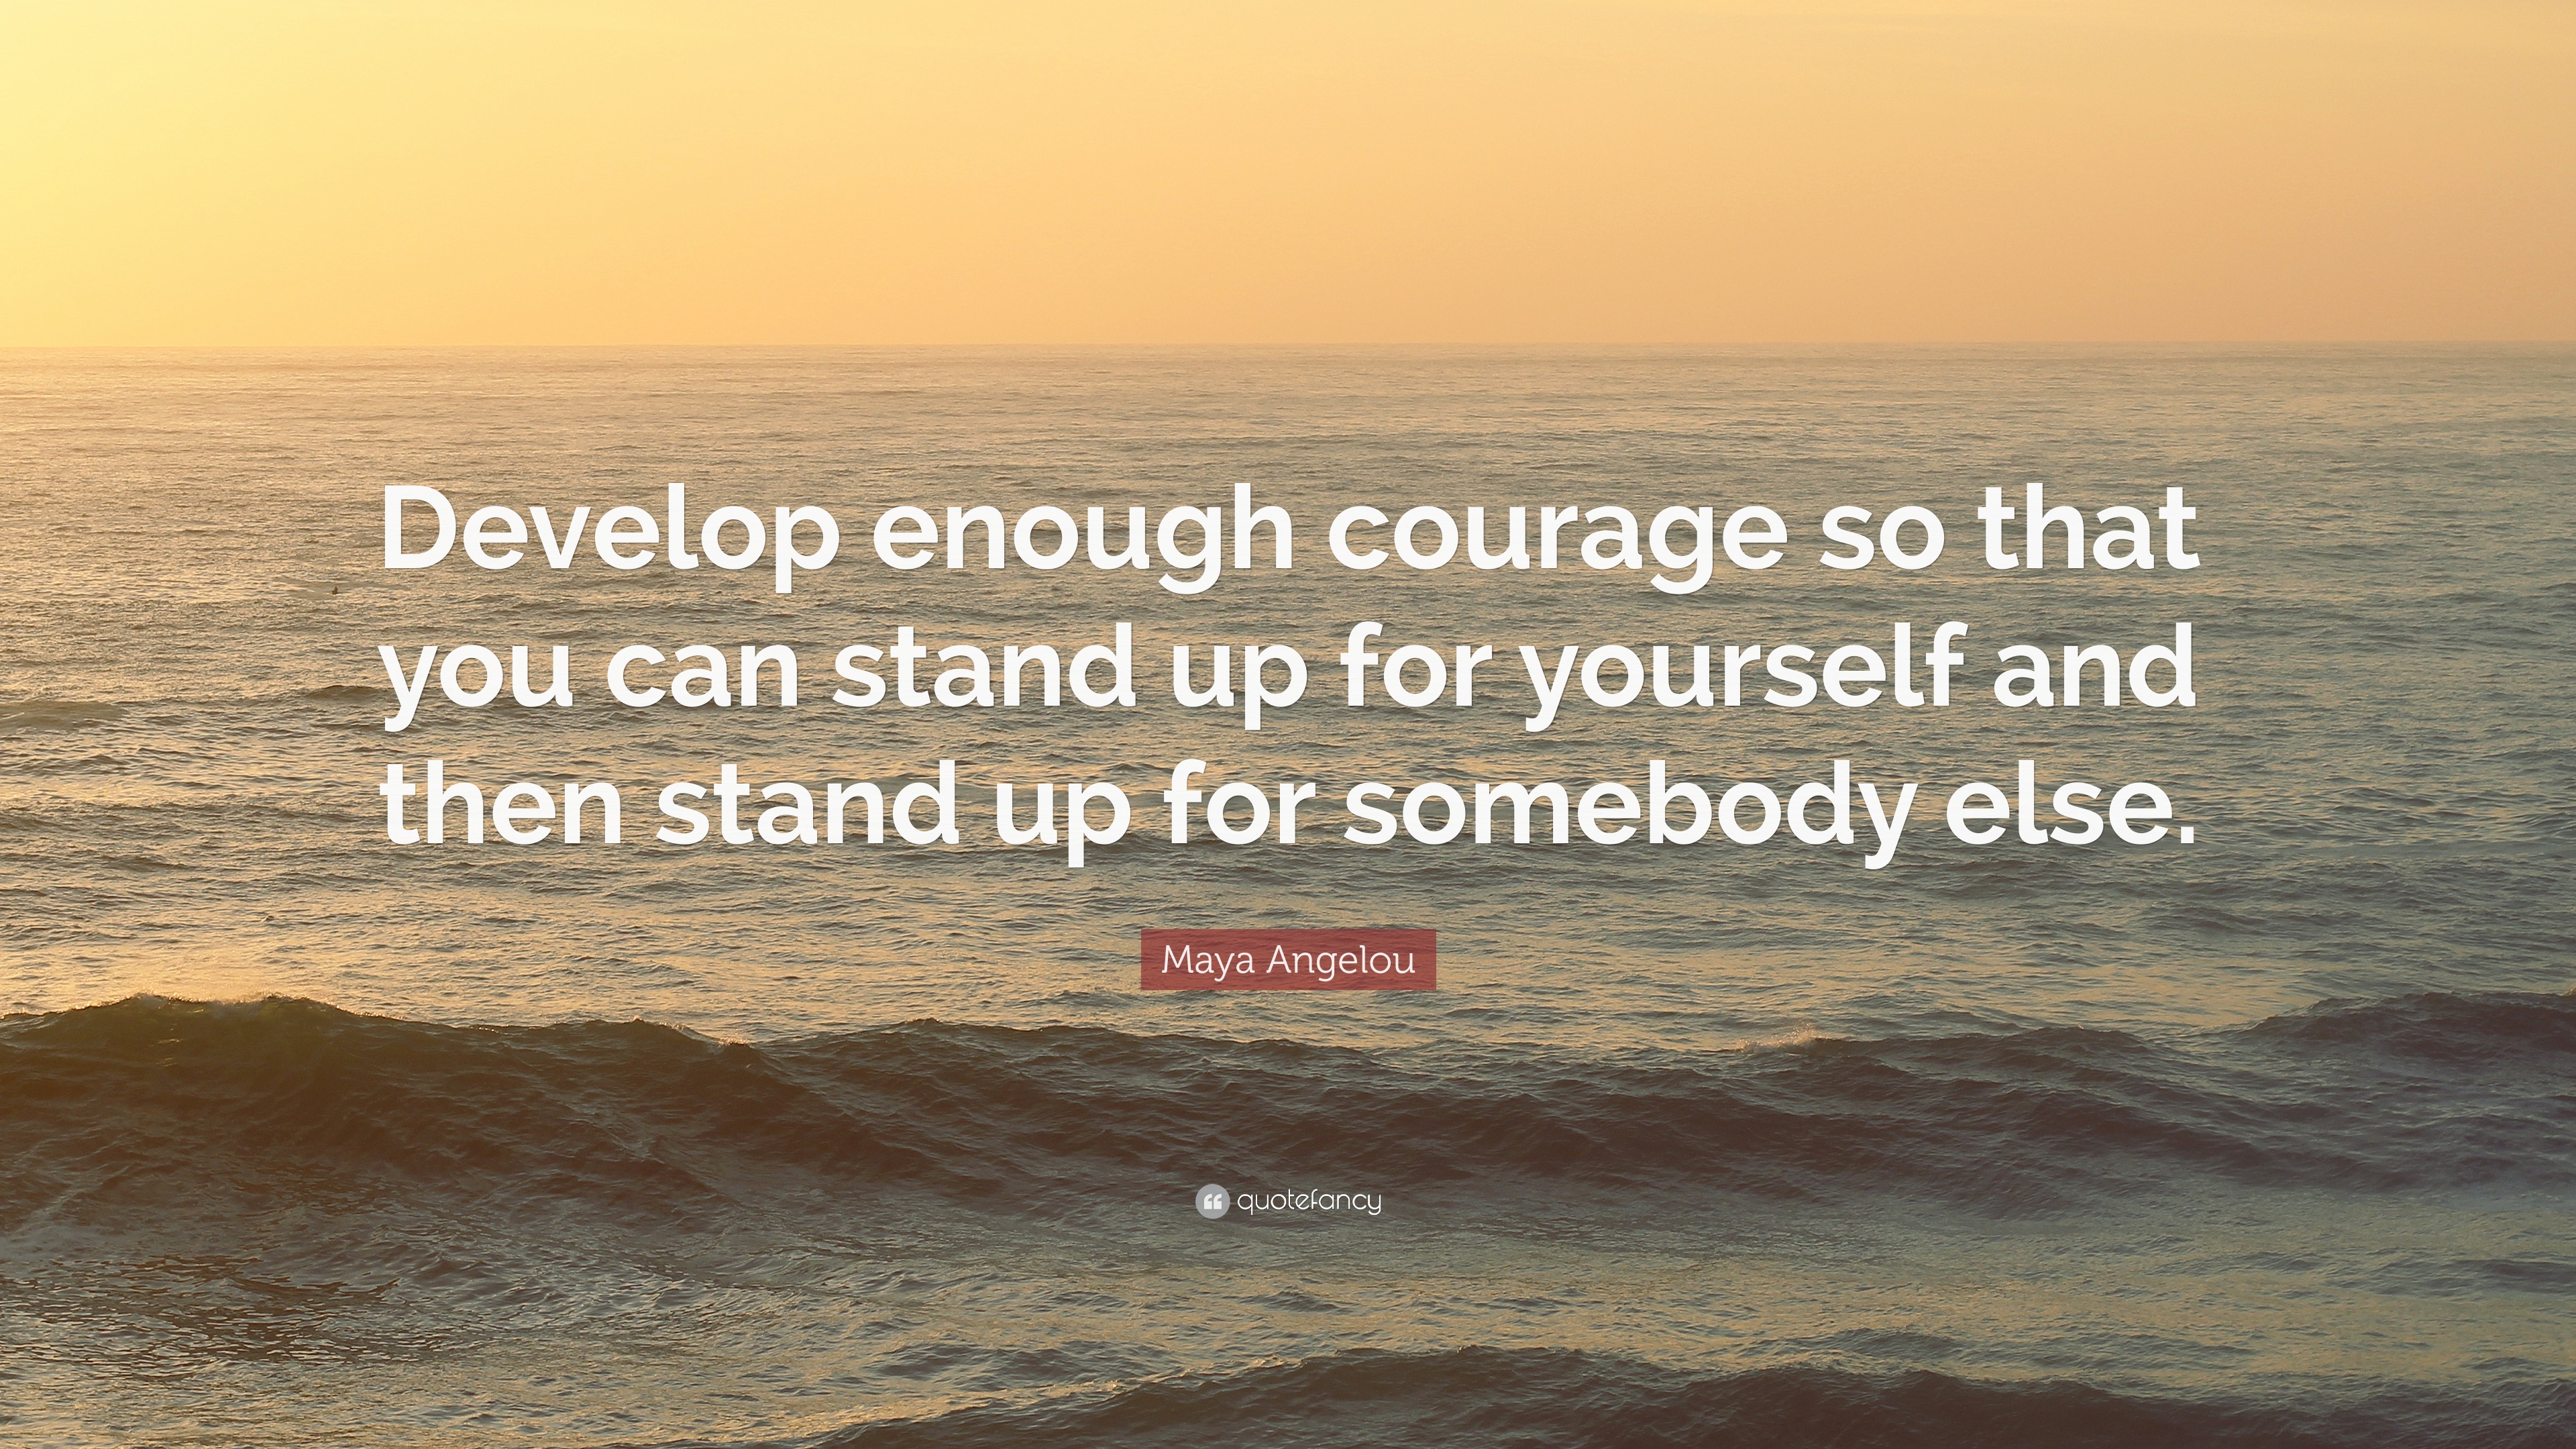 Maya Angelou Quote: "Develop enough courage so that you ...